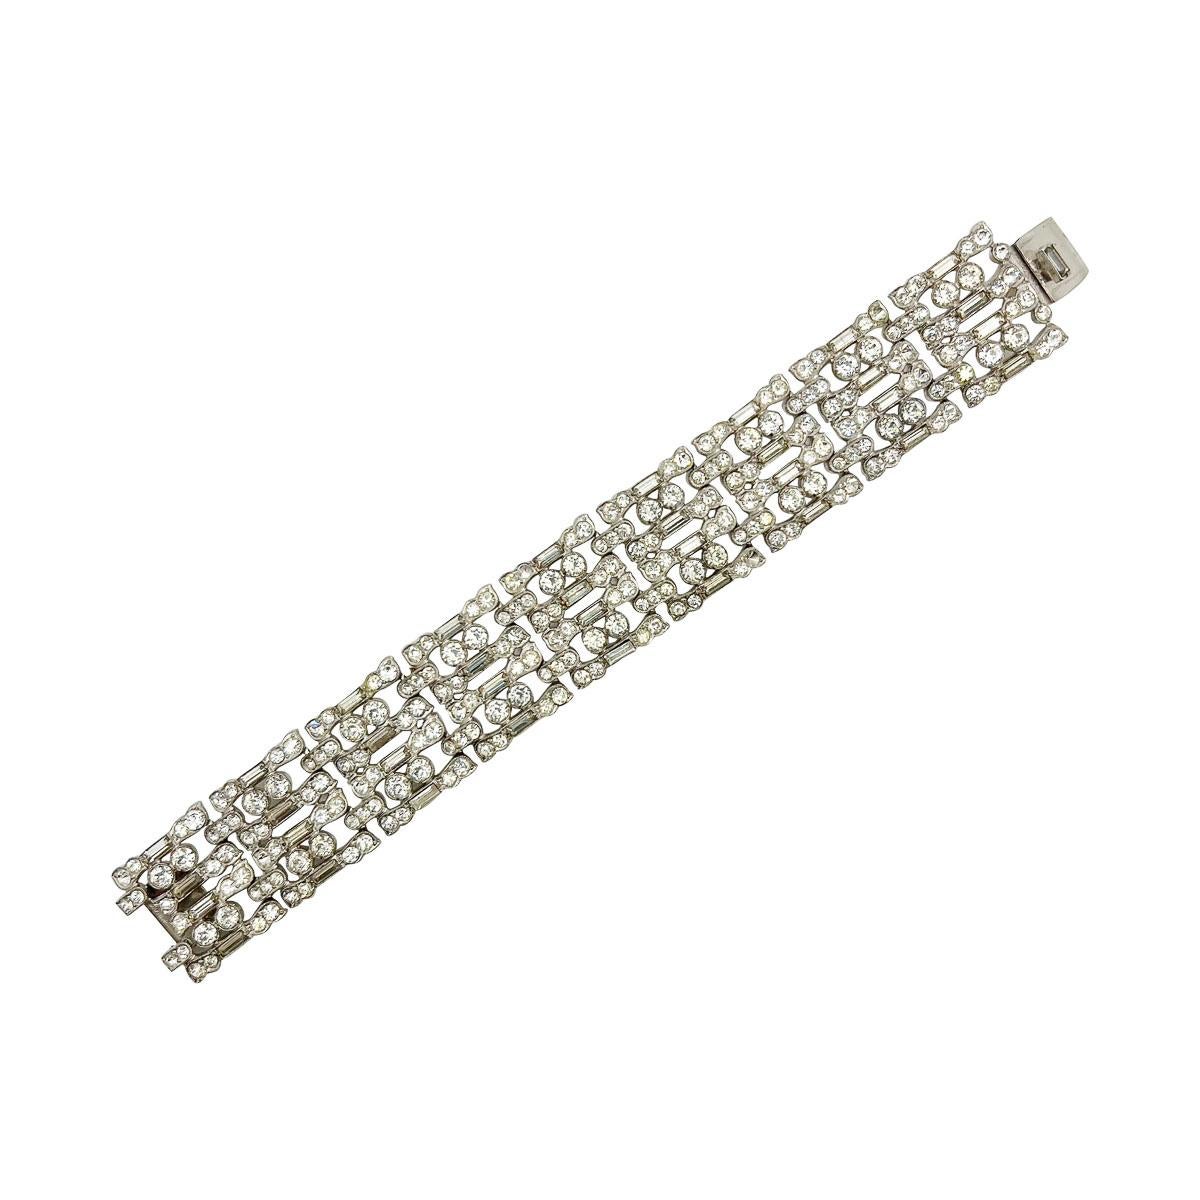 Vintage Art Deco Paste Cocktail Bracelet 1930s In Good Condition For Sale In Wilmslow, GB